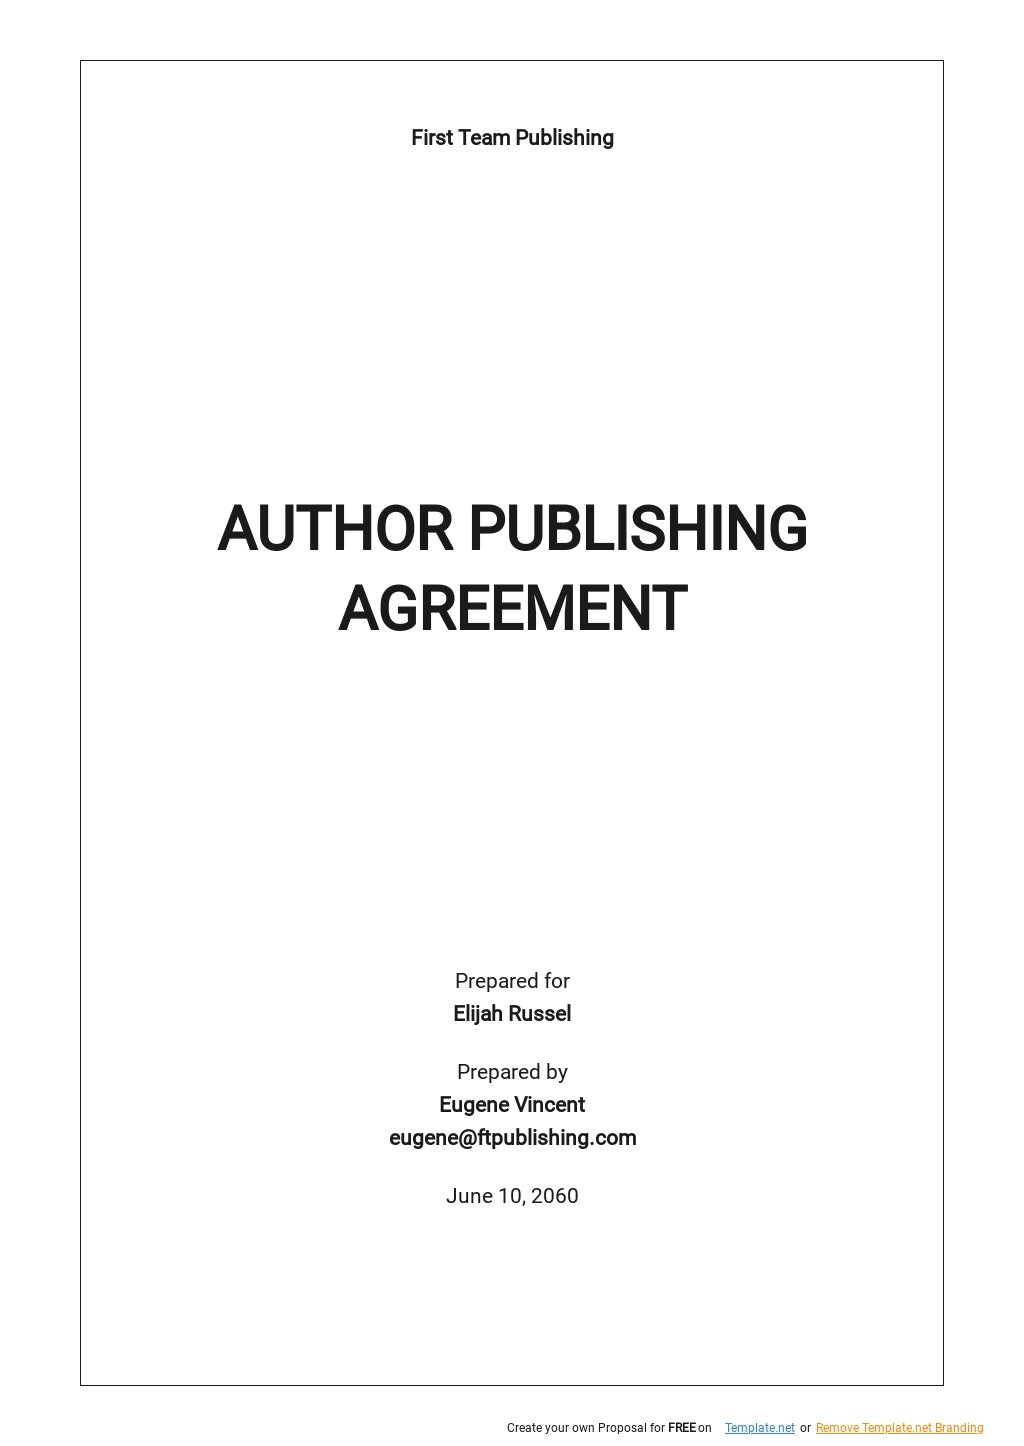 Author Publishing Agreement Template Google Docs, Word, Apple Pages